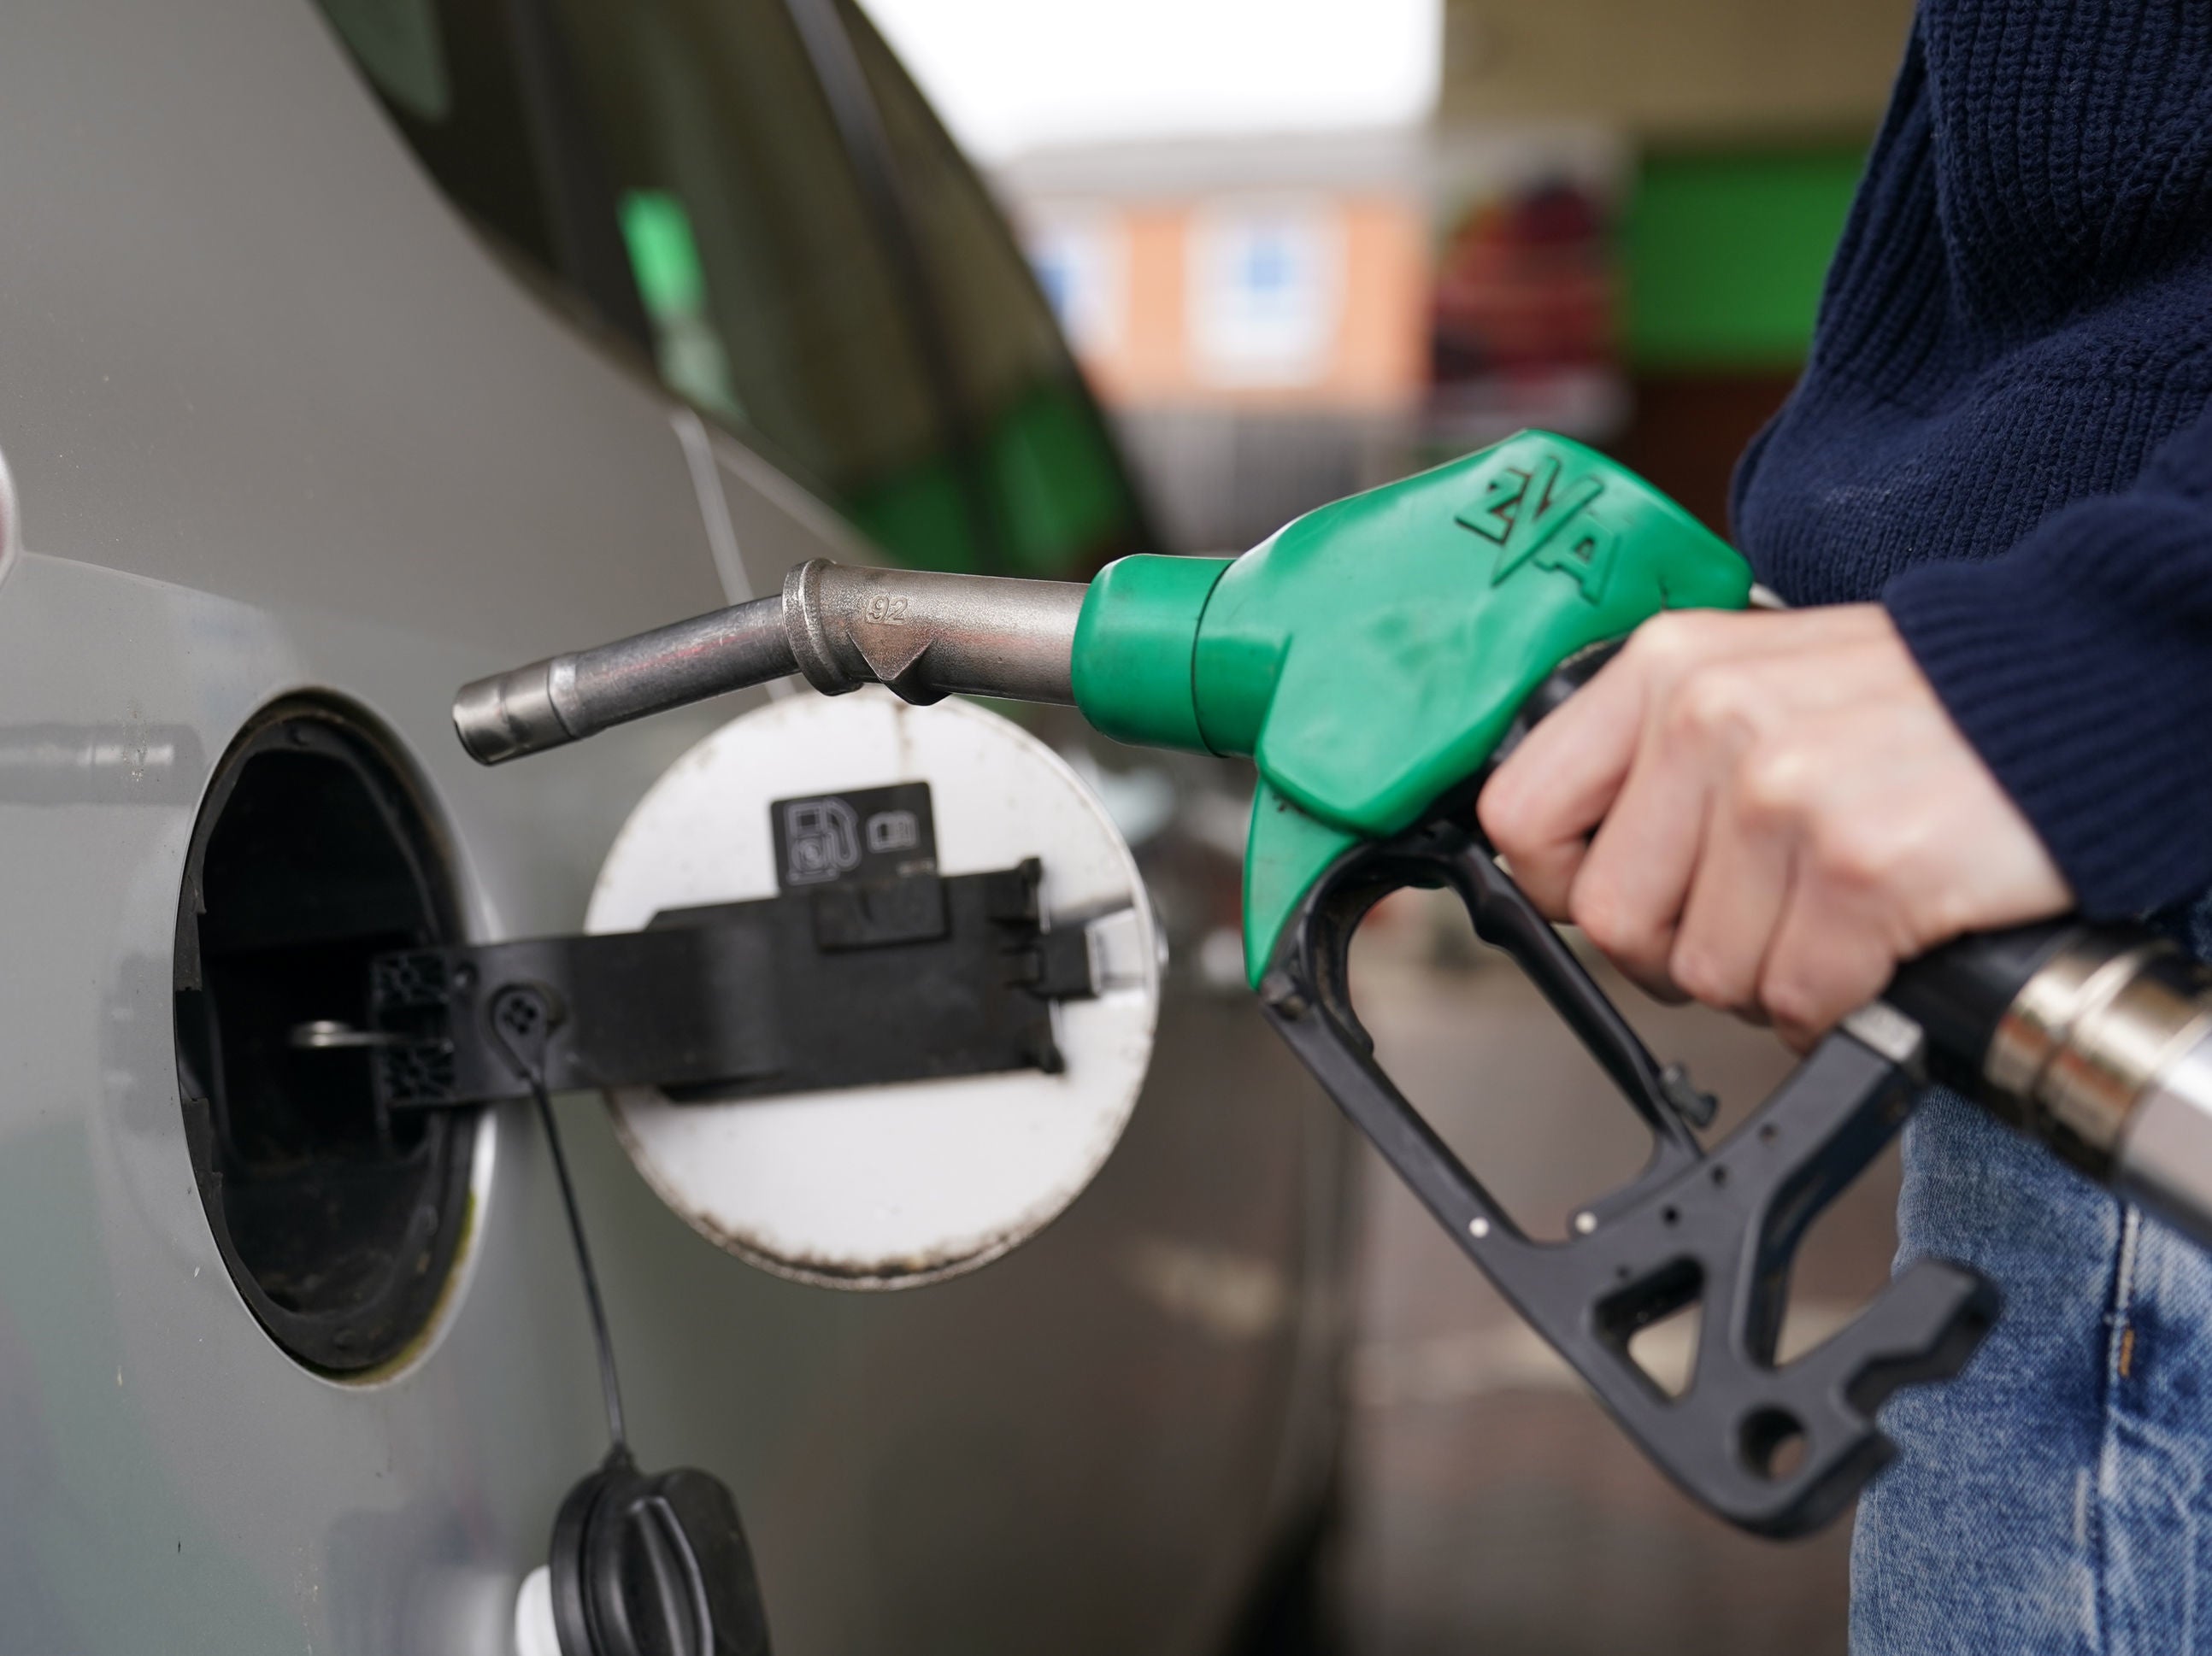 Petrol prices have reached another new record high of 185.4p at UK forecourts